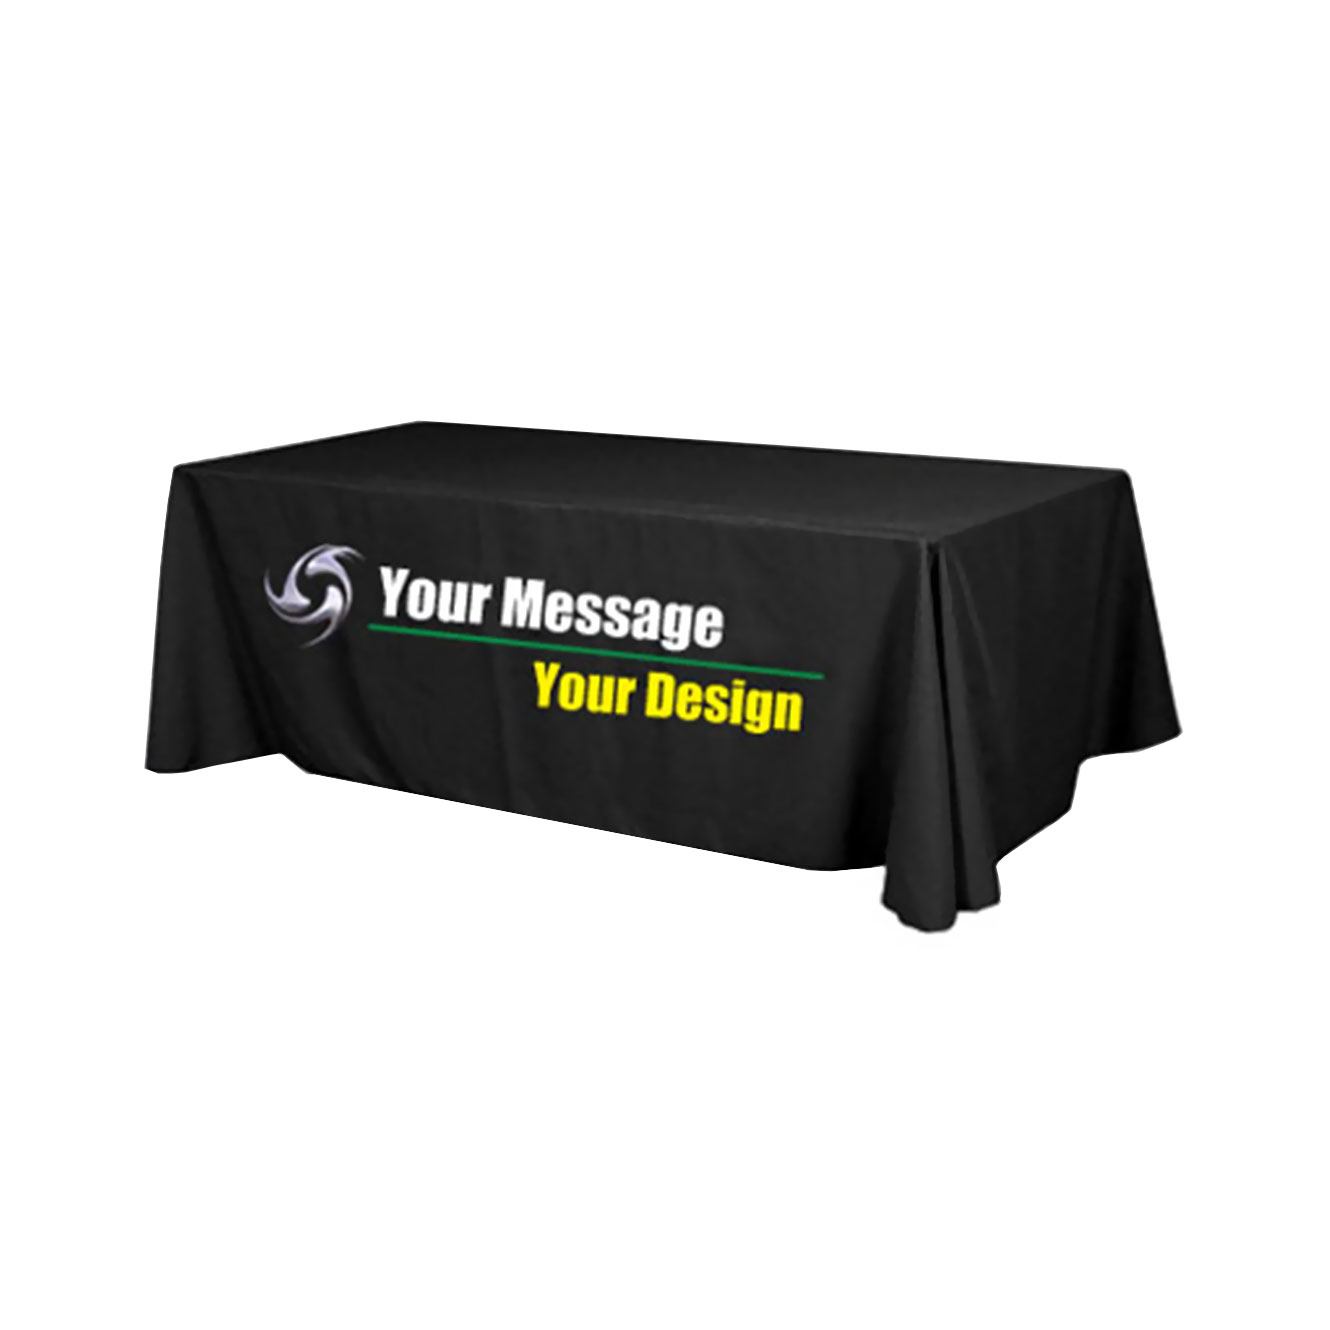 https://bigbanner.com.au/wp-content/uploads/2020/01/6ft-8ft-1-Sided-Deluxe-Printed-Fitted-Table-Throws-Covers-1.jpg